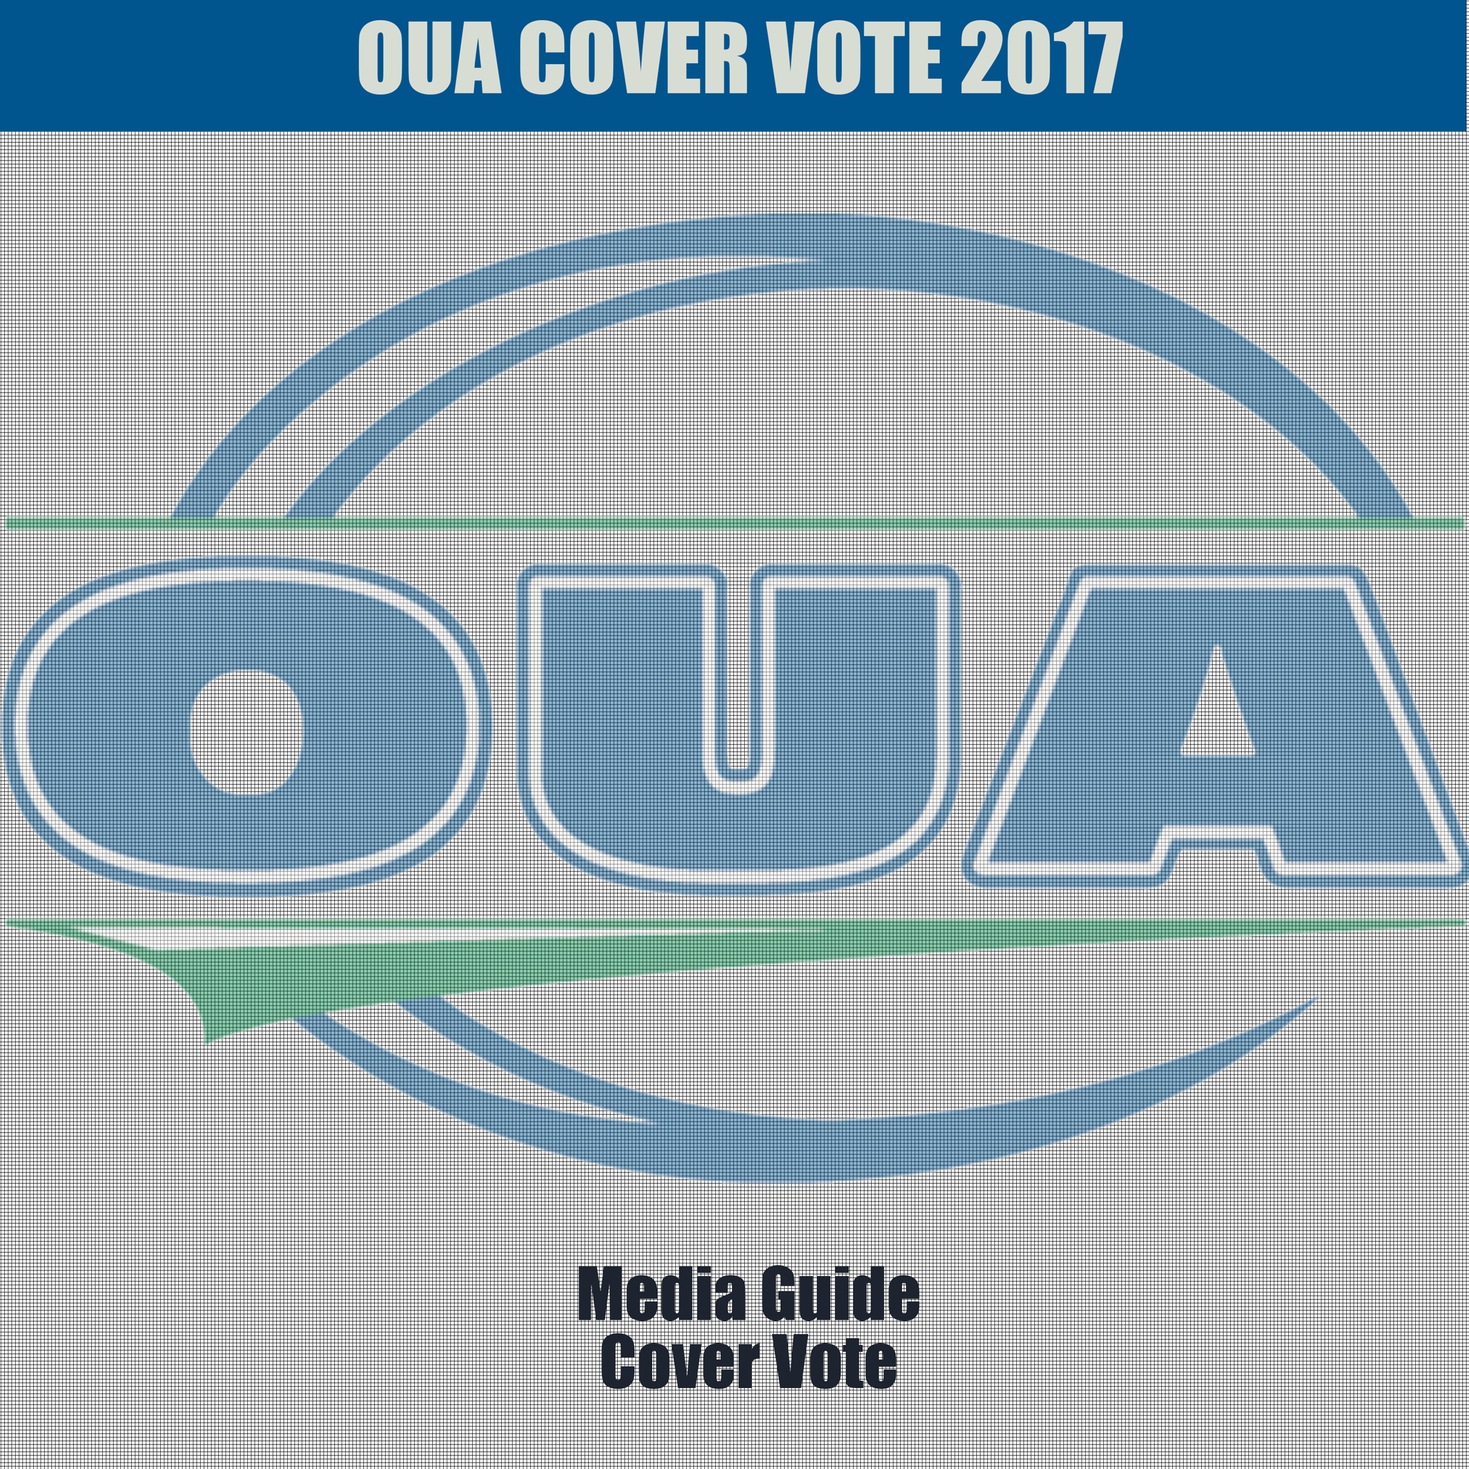 OUA Cover Vote Starts Today